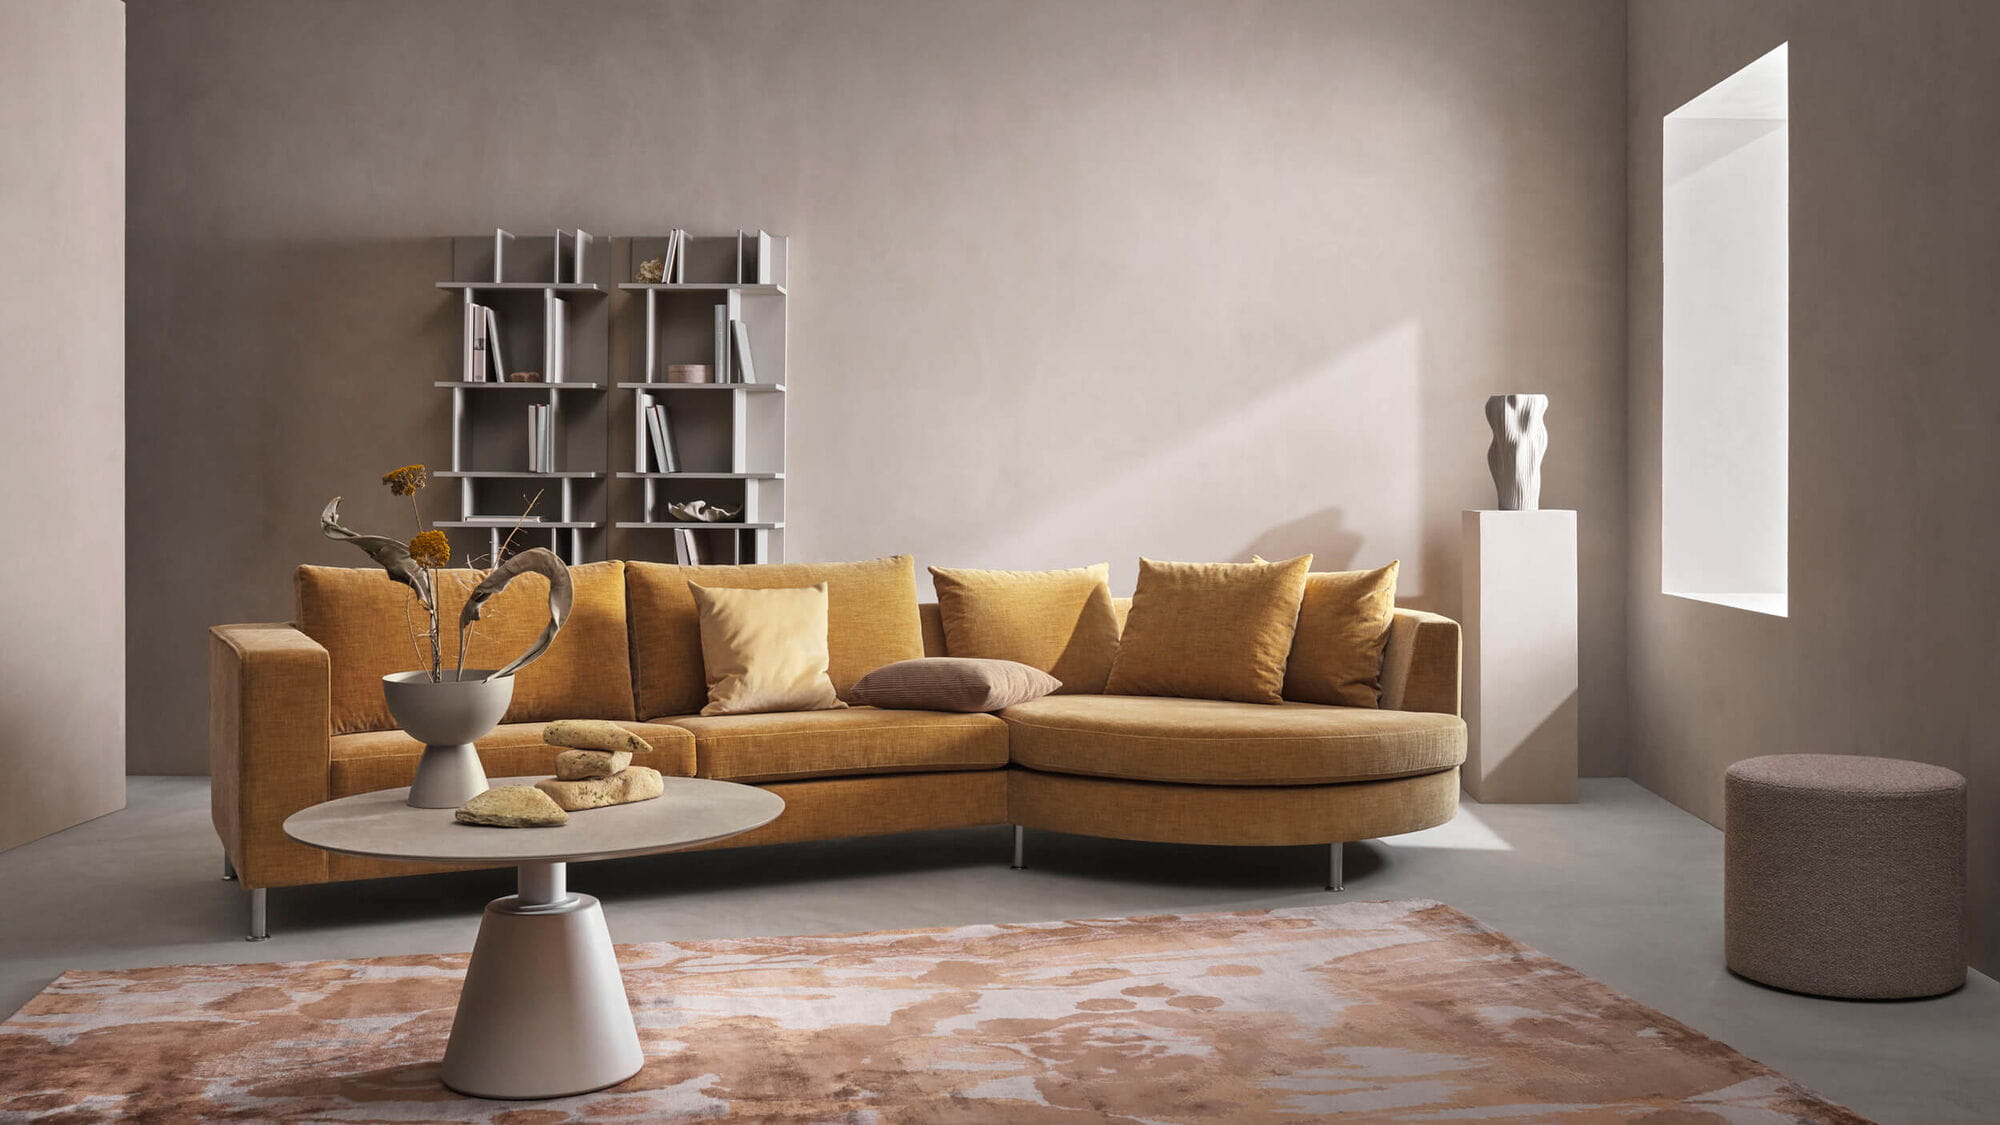 luxurious living room, furniture storage for bedroom, sectional sofa, coffee table, rug